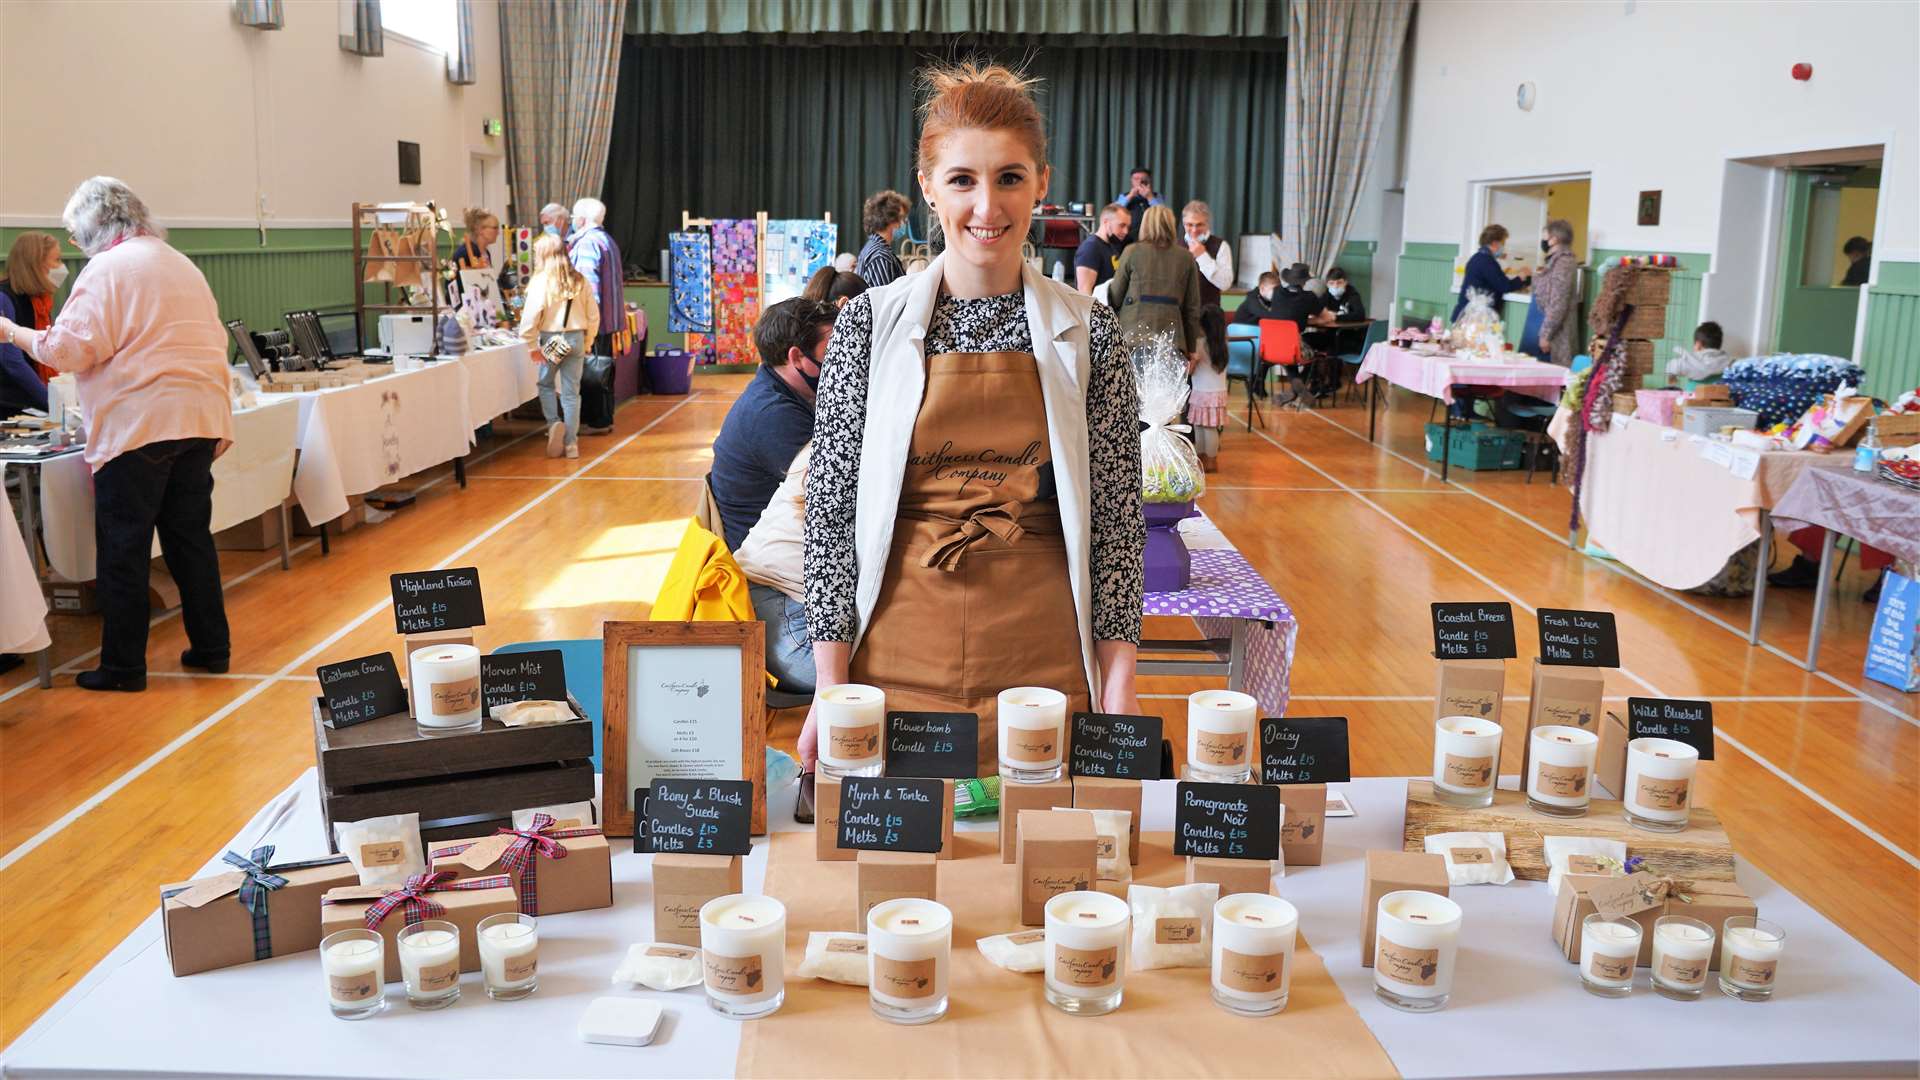 Gersa-based Bronwyn Ross from the Caithness Candle Company. Bronwyn says she sells a lot of her candles and melts through her website and social media but prefers going out to craft fairs and markets. Picture: DGS